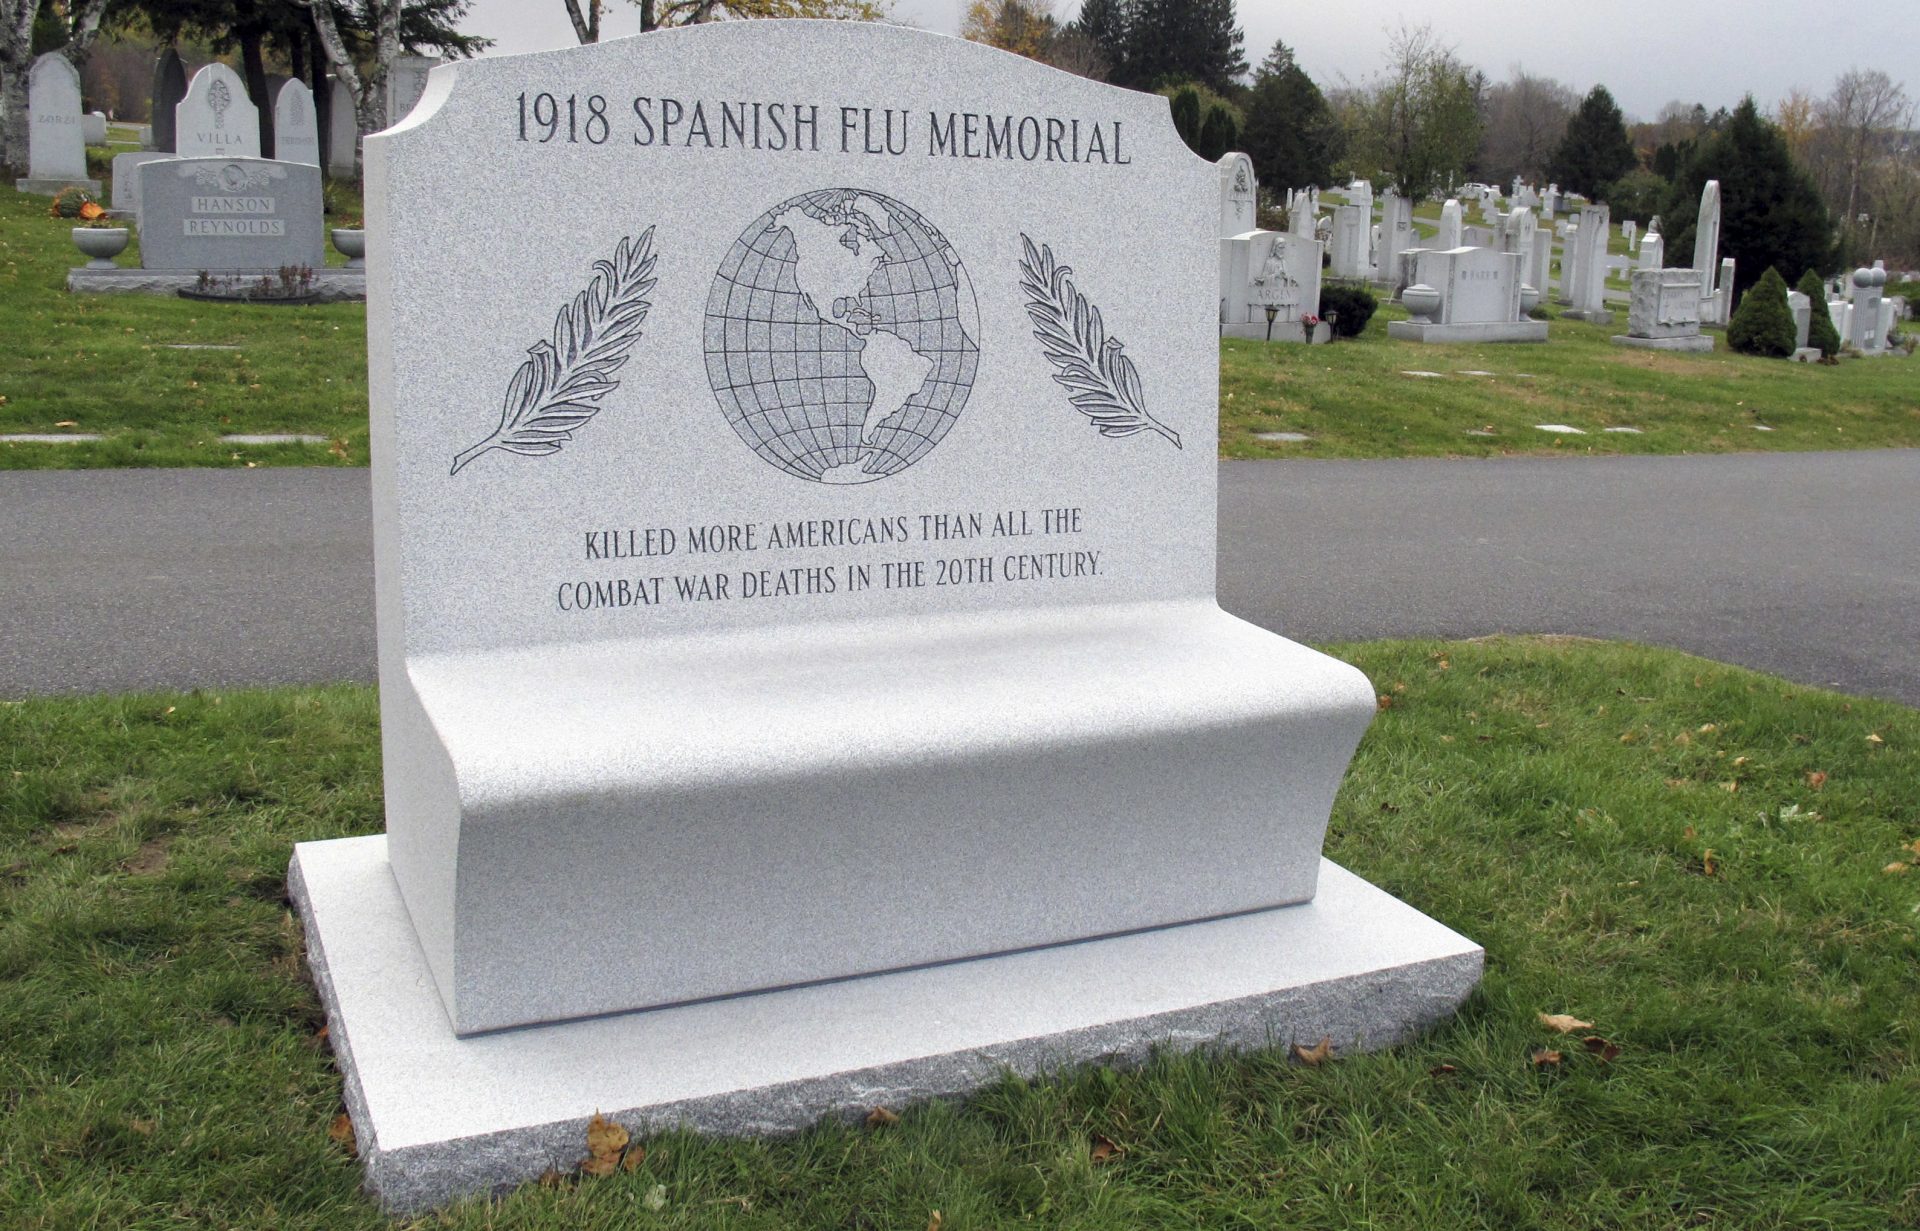 This Tuesday, Oct. 23, 2018, photo shows a memorial to victims of the Spanish flu at the Hope Cemetery in Barre, Vt. Brian Zecchinelli installed the monument to commemorate his grandfather, killed when the flu swept the state in the fall of 1918. It is estimated the flu killed 50 million people worldwide.